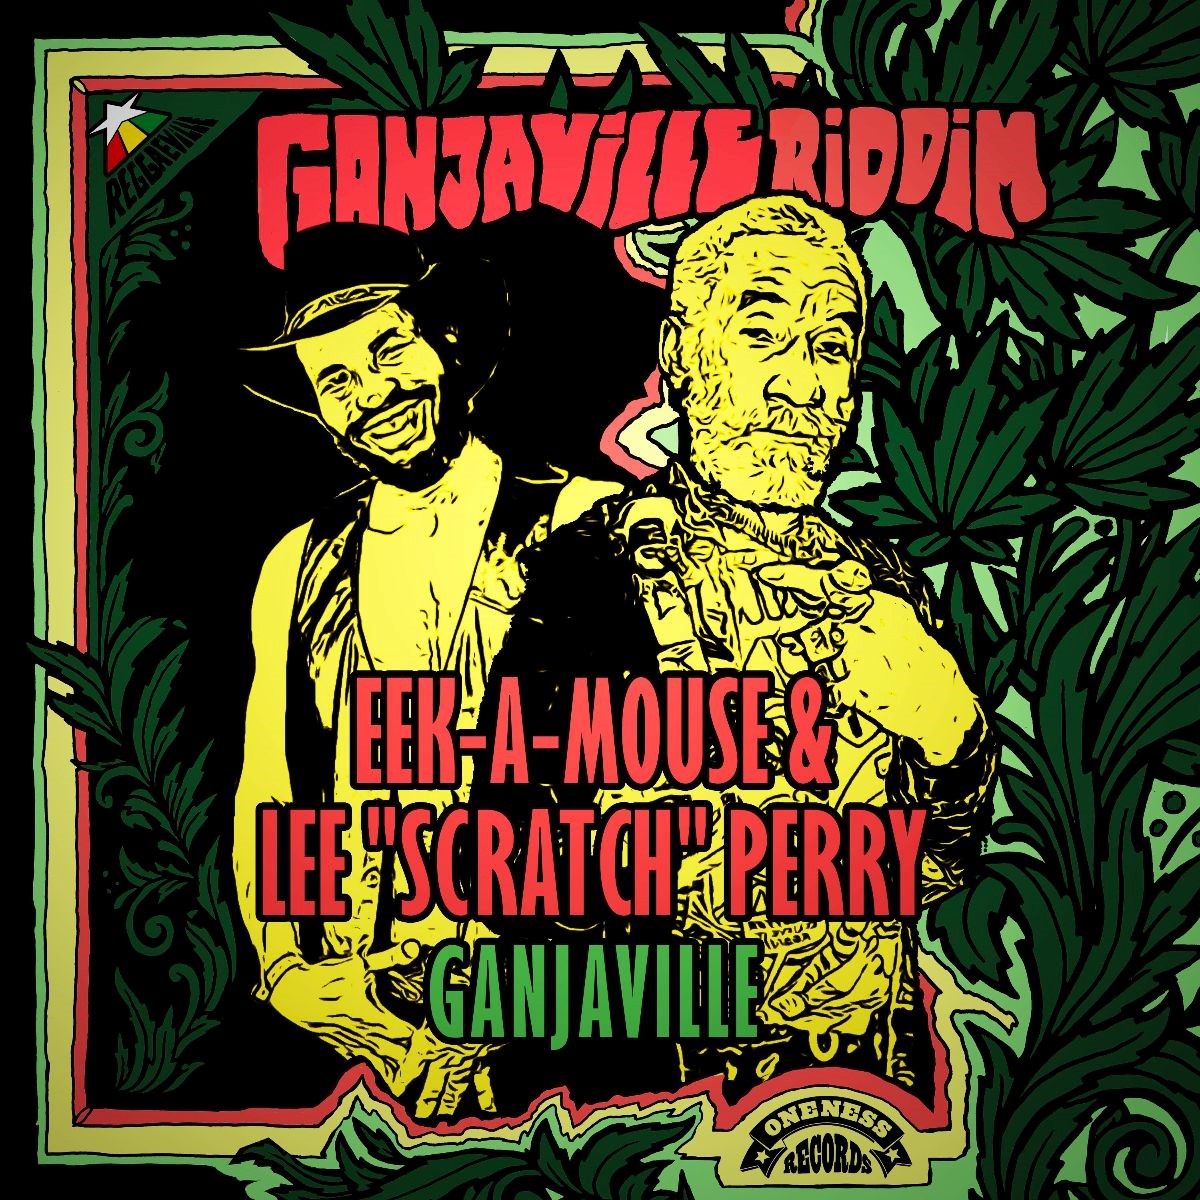 Eek-a-Mouse & Lee 'Scratch' Perry